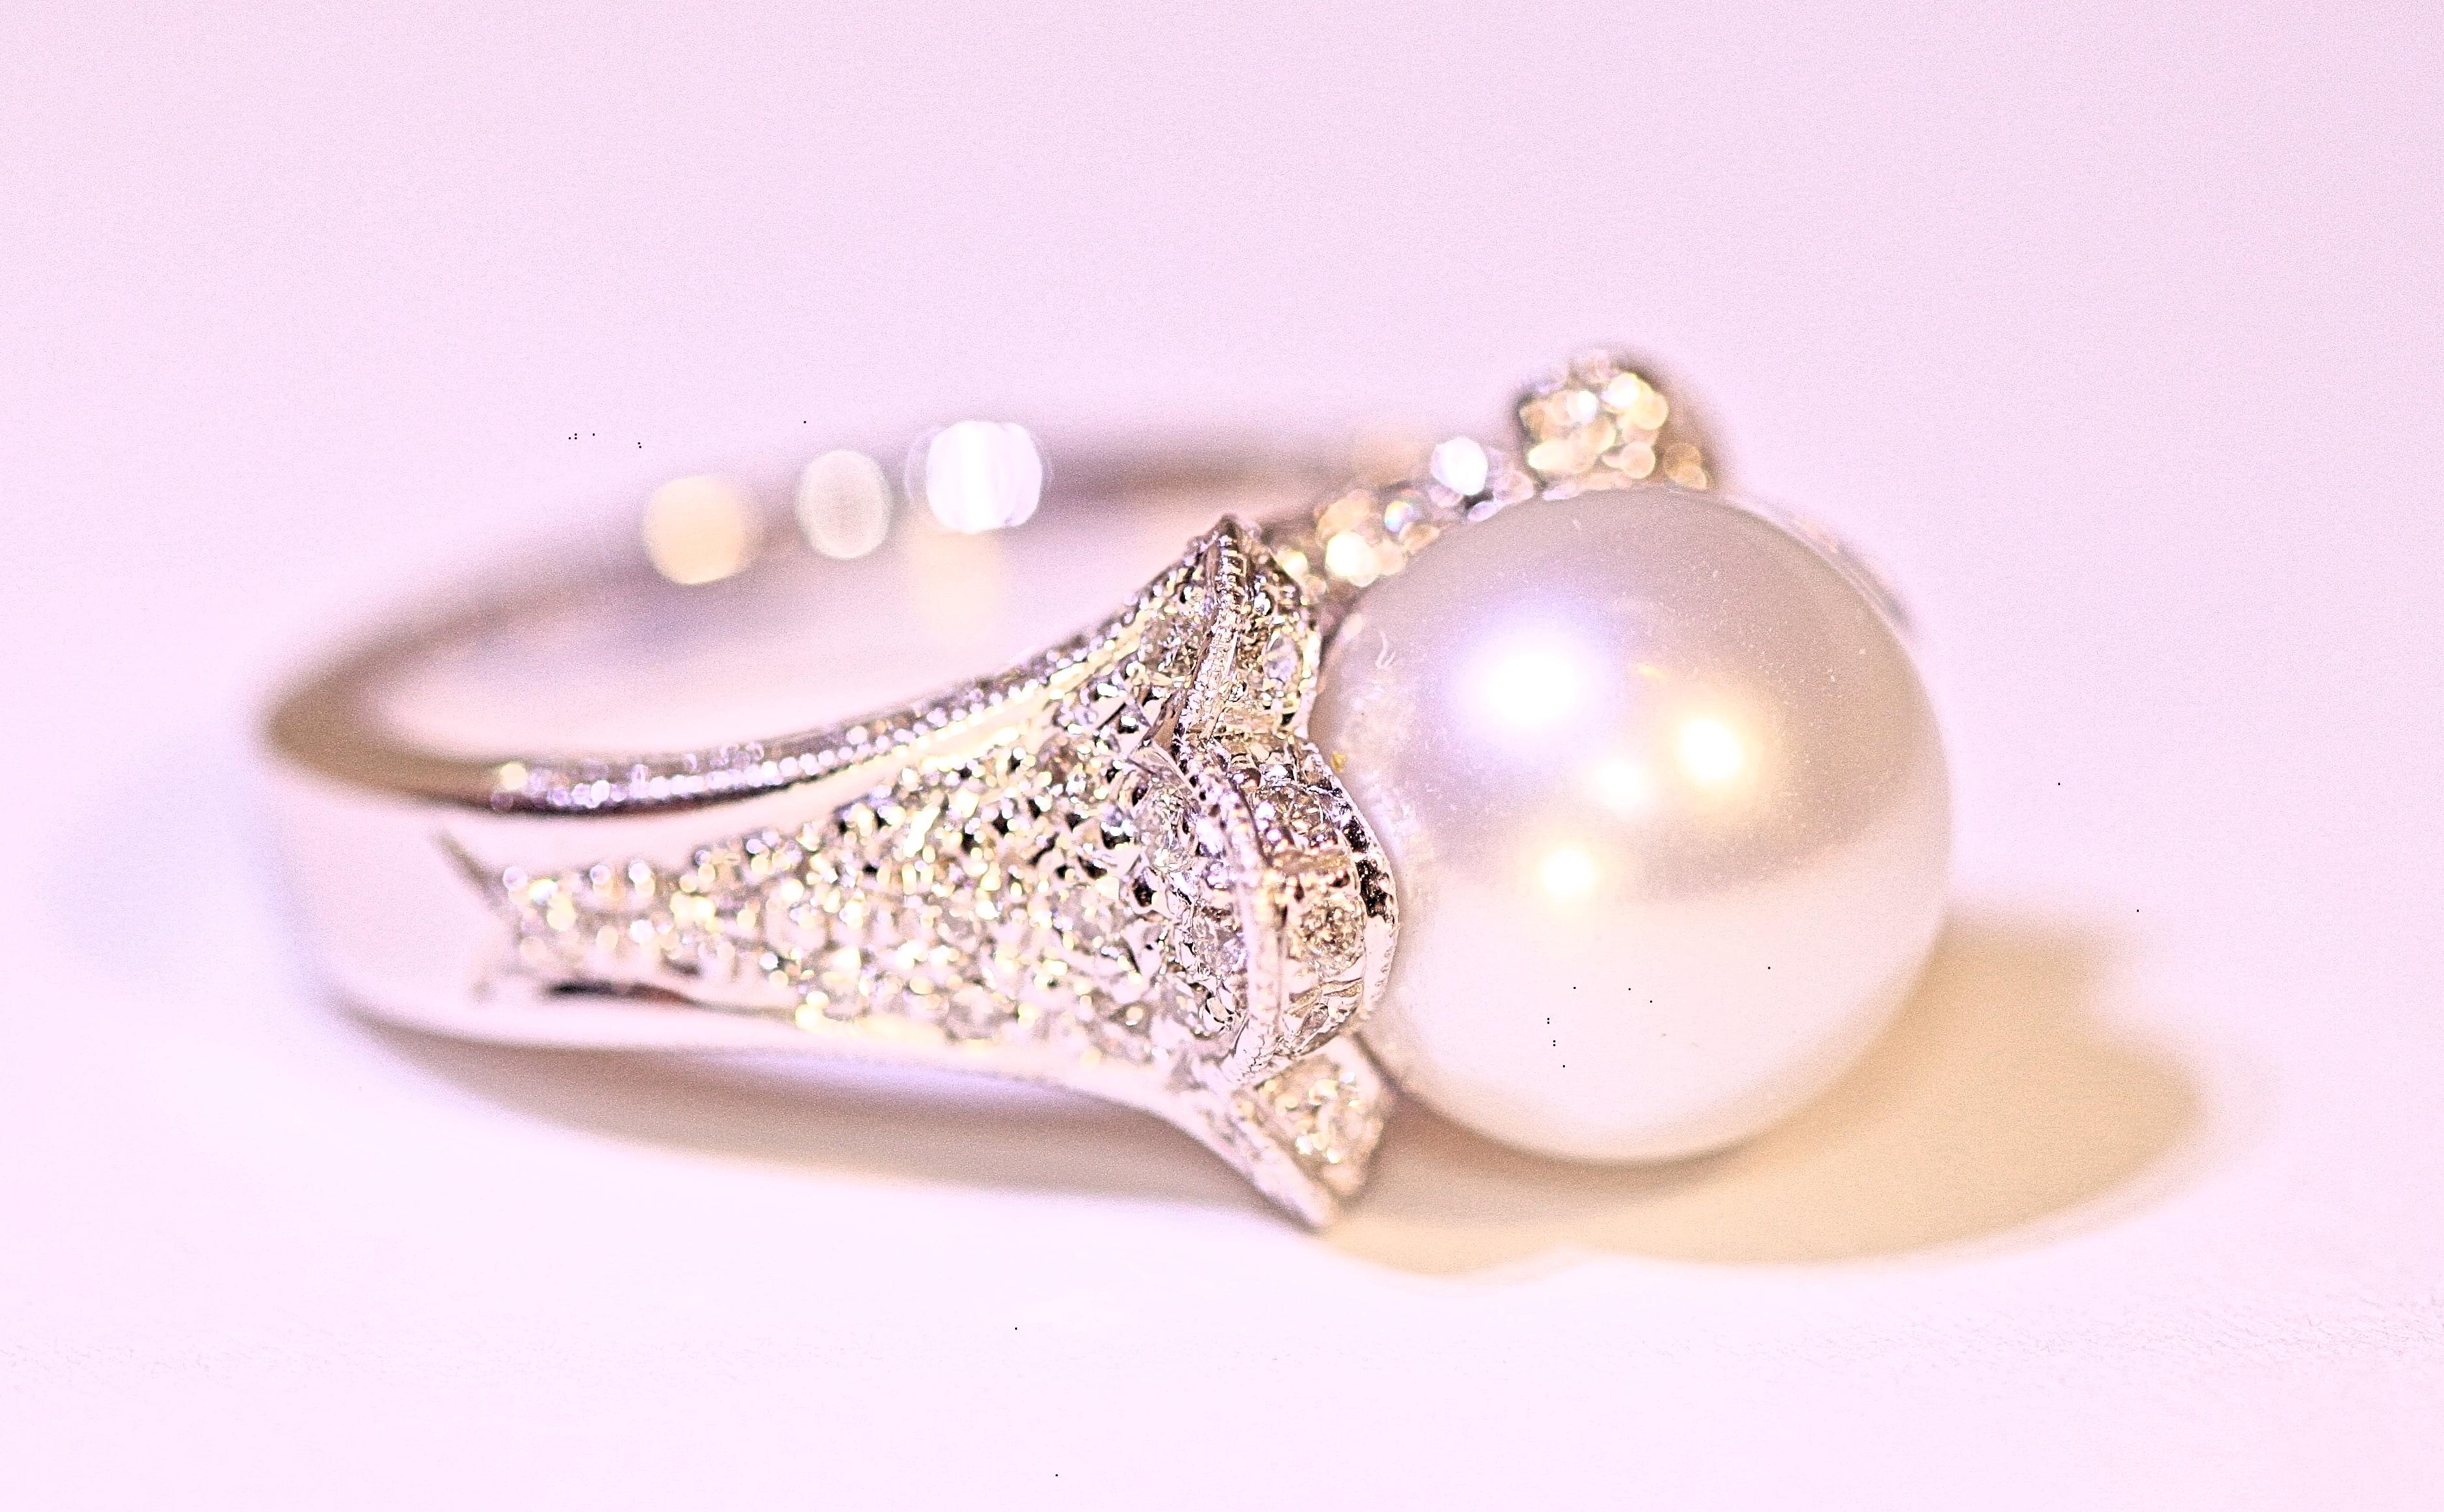 A stunning 14 karat white gold, pearl and diamond ring.  The ring consists of one 10 mm pearl and .98 carat total weight of round brilliant cut diamonds.  The pearl is cream white in color, spherical in shape, very minor blemishes and very good